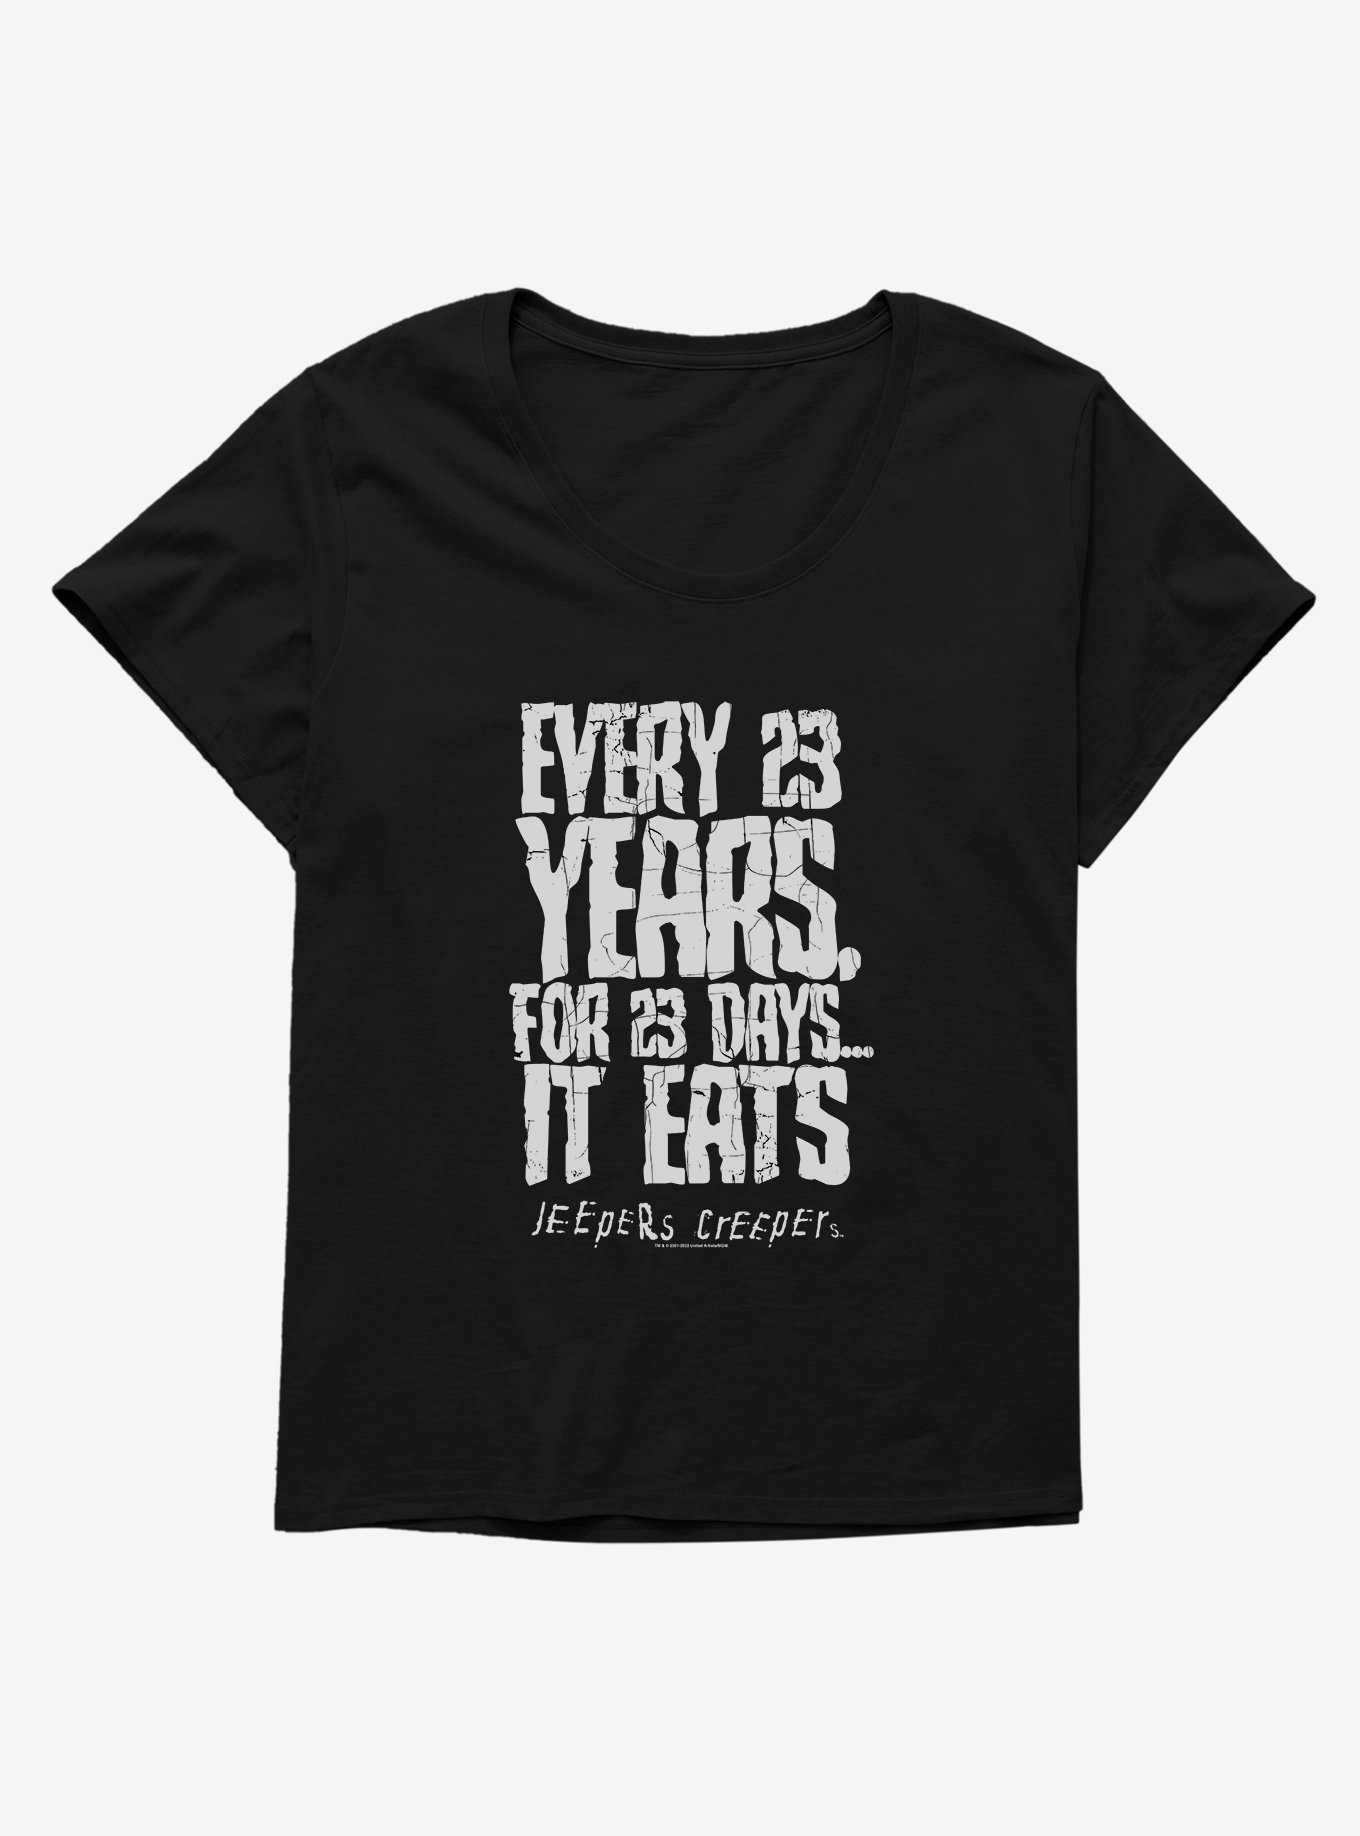 Jeepers Creepers 23 Years For 23 Days Girls T-Shirt Plus Size, , hi-res